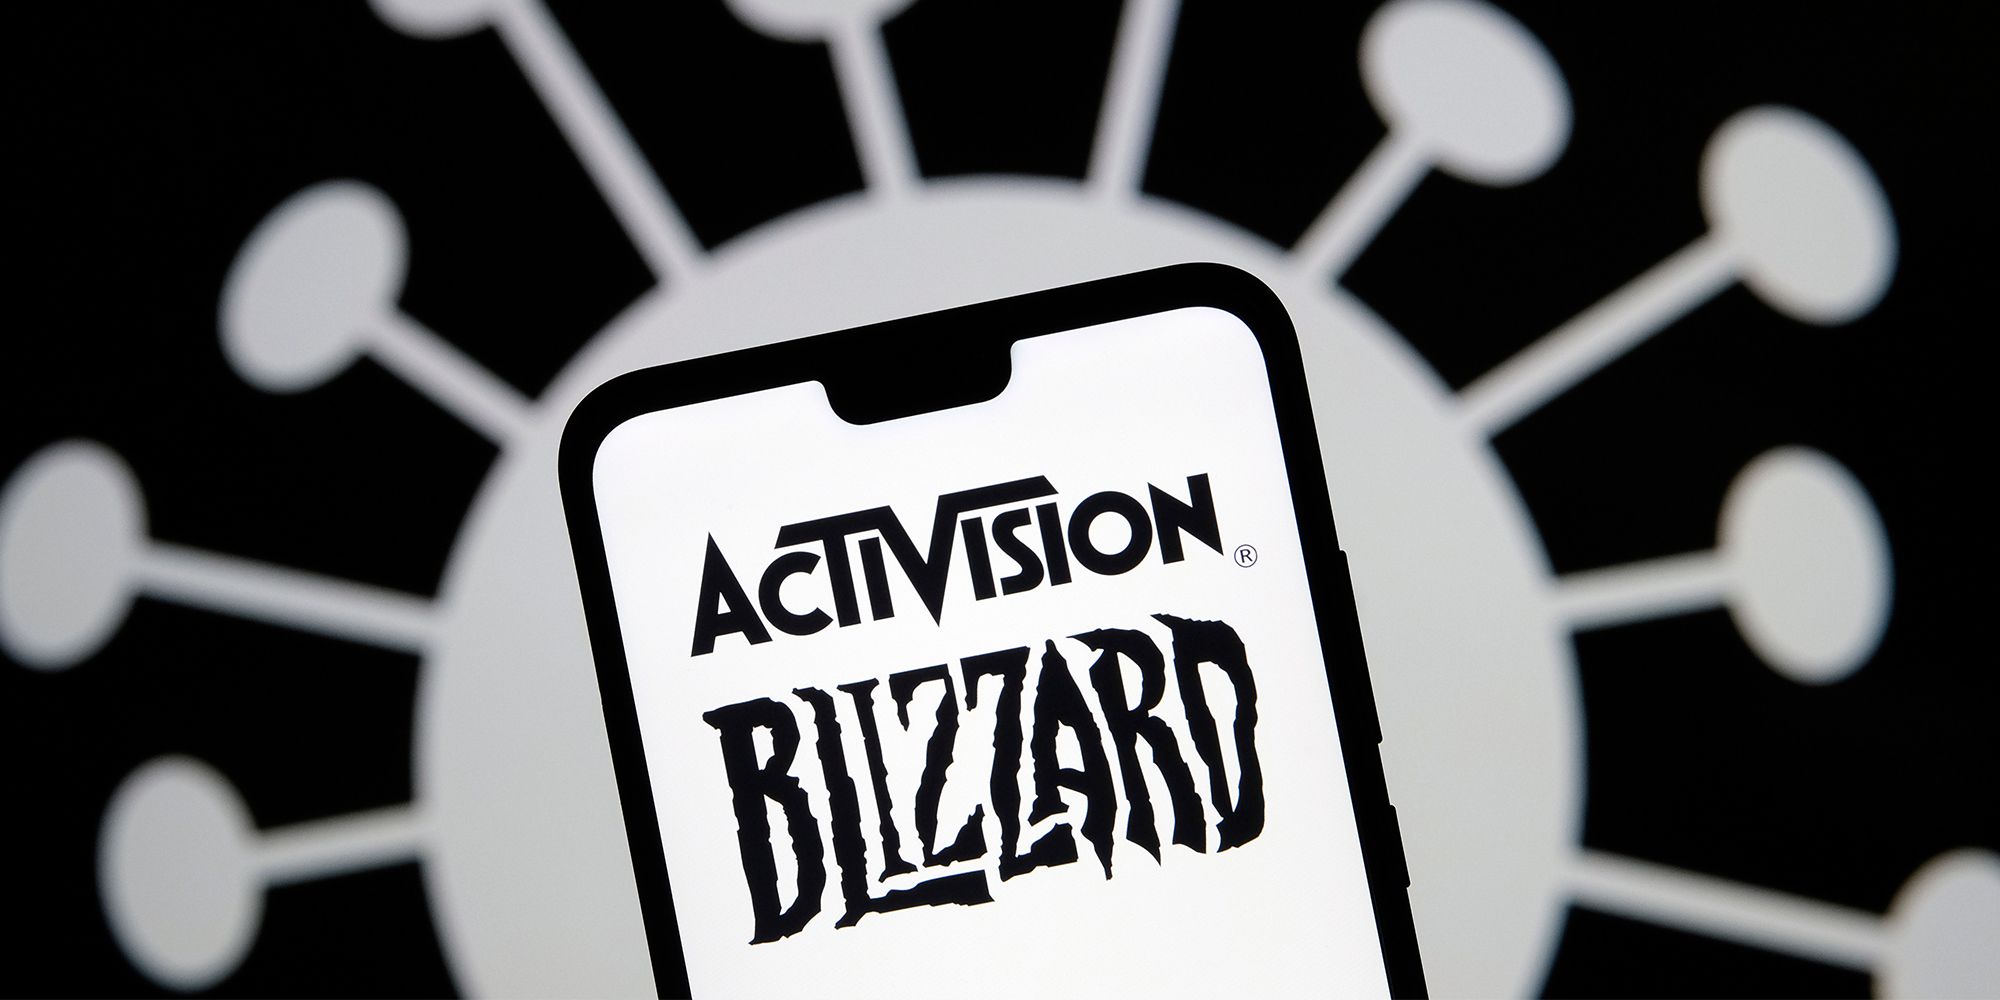 Activision Blizzard logo on a mobile phone against a black background with a white circle dividing into white lines ending with more white circles